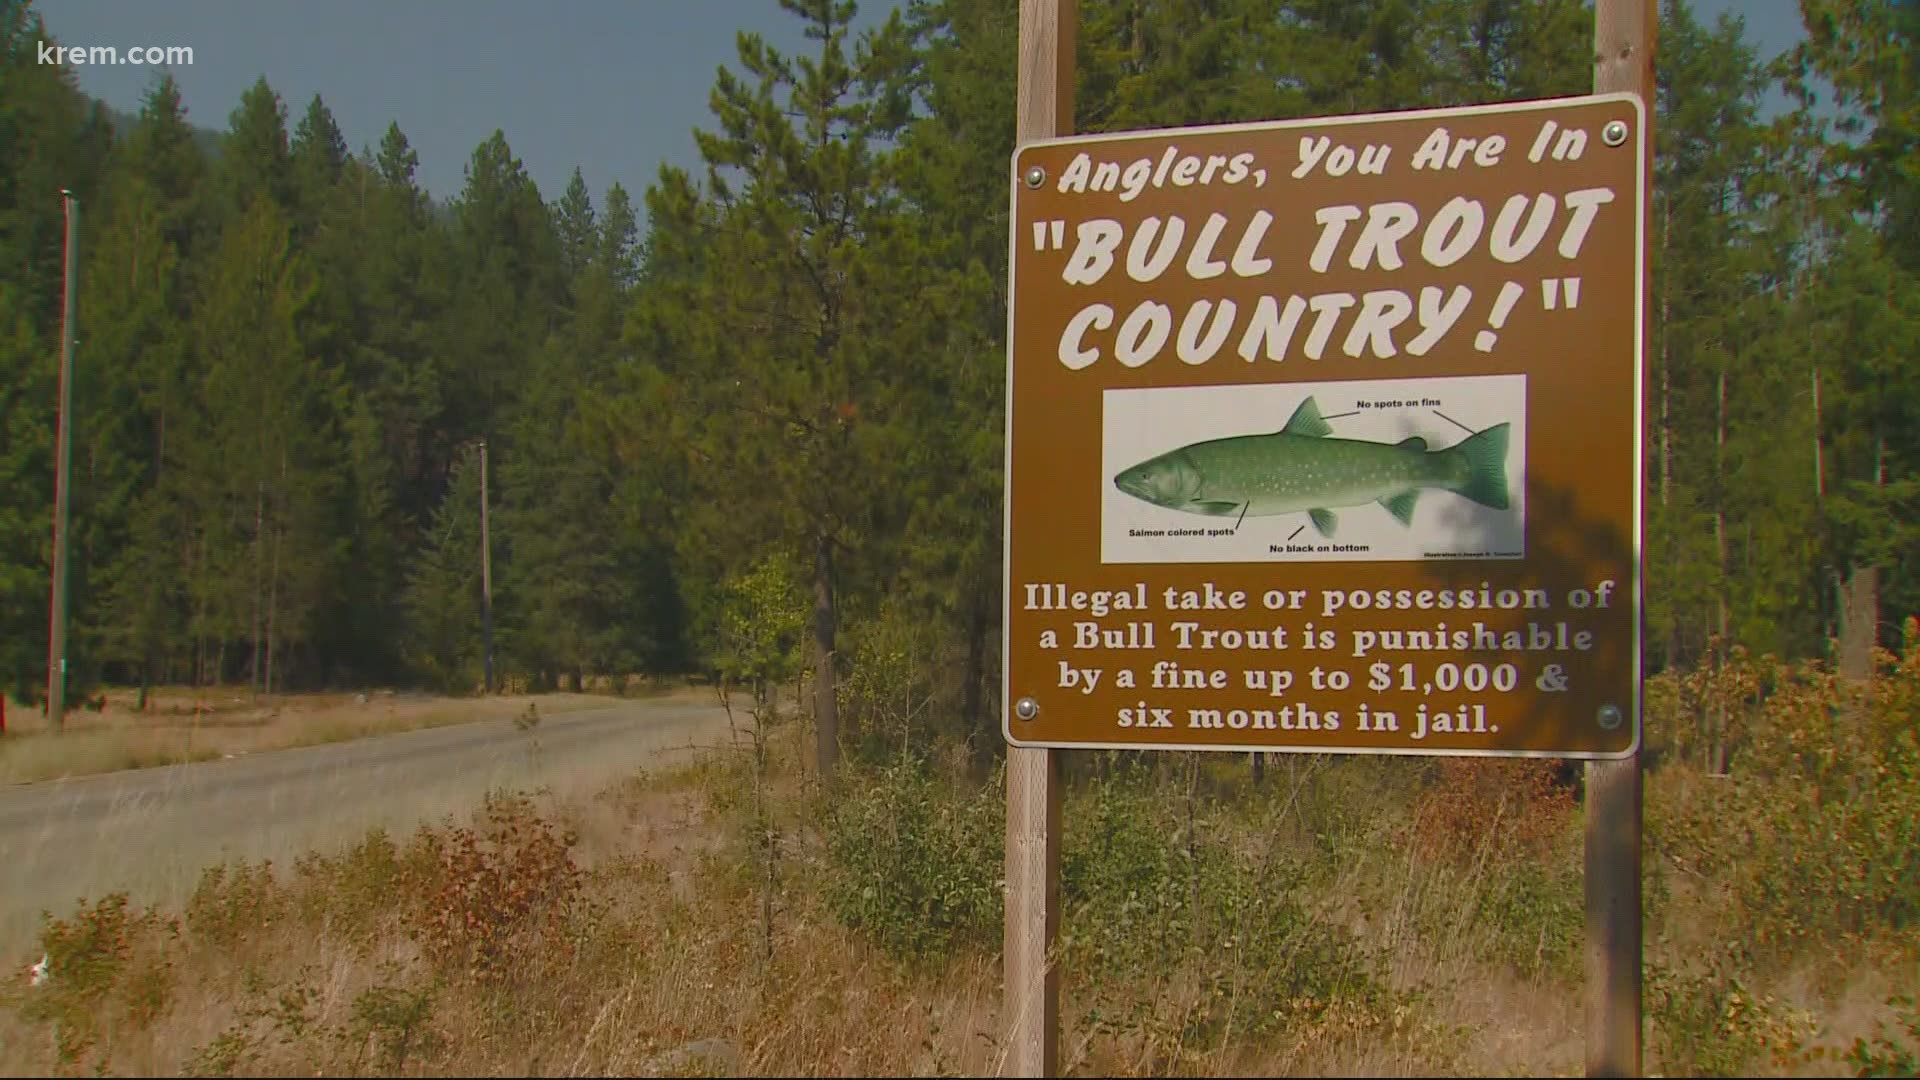 The Bull Trout is an endangered species of Char that calls Trestle Creek home, but the danger doesn't only come from the flames.